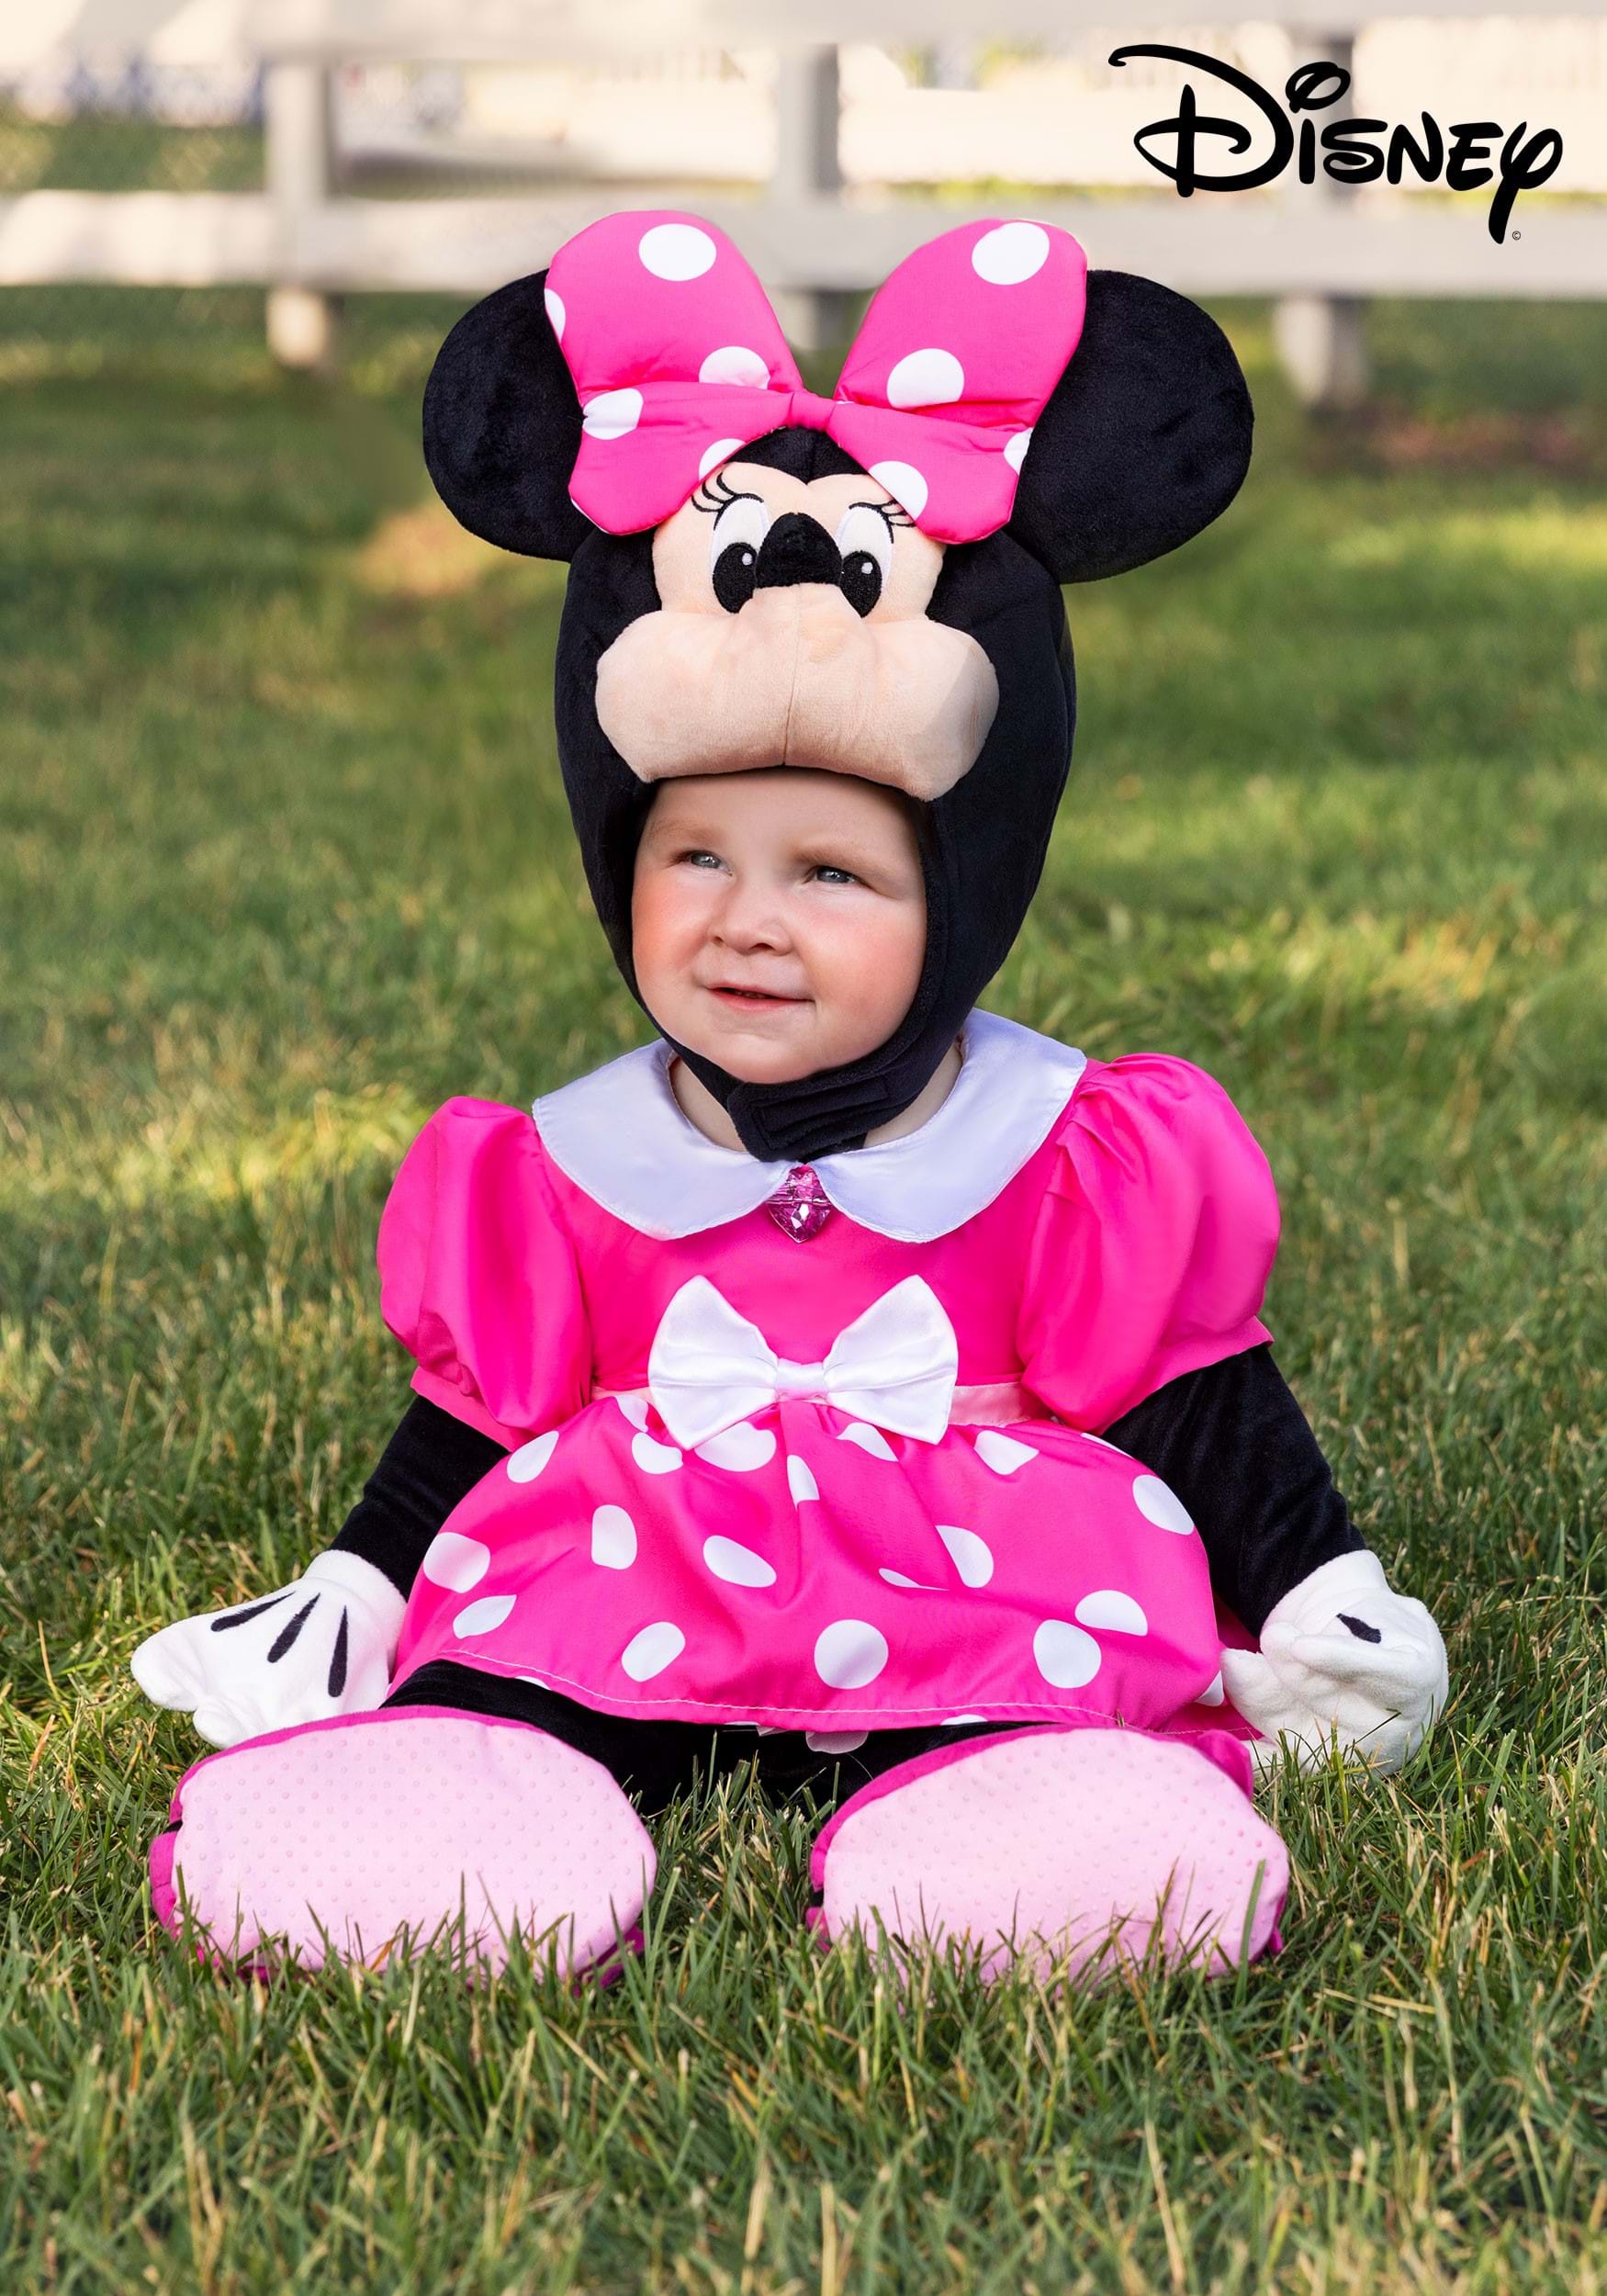 Minnie Mouse Costume - Women's - Party On!